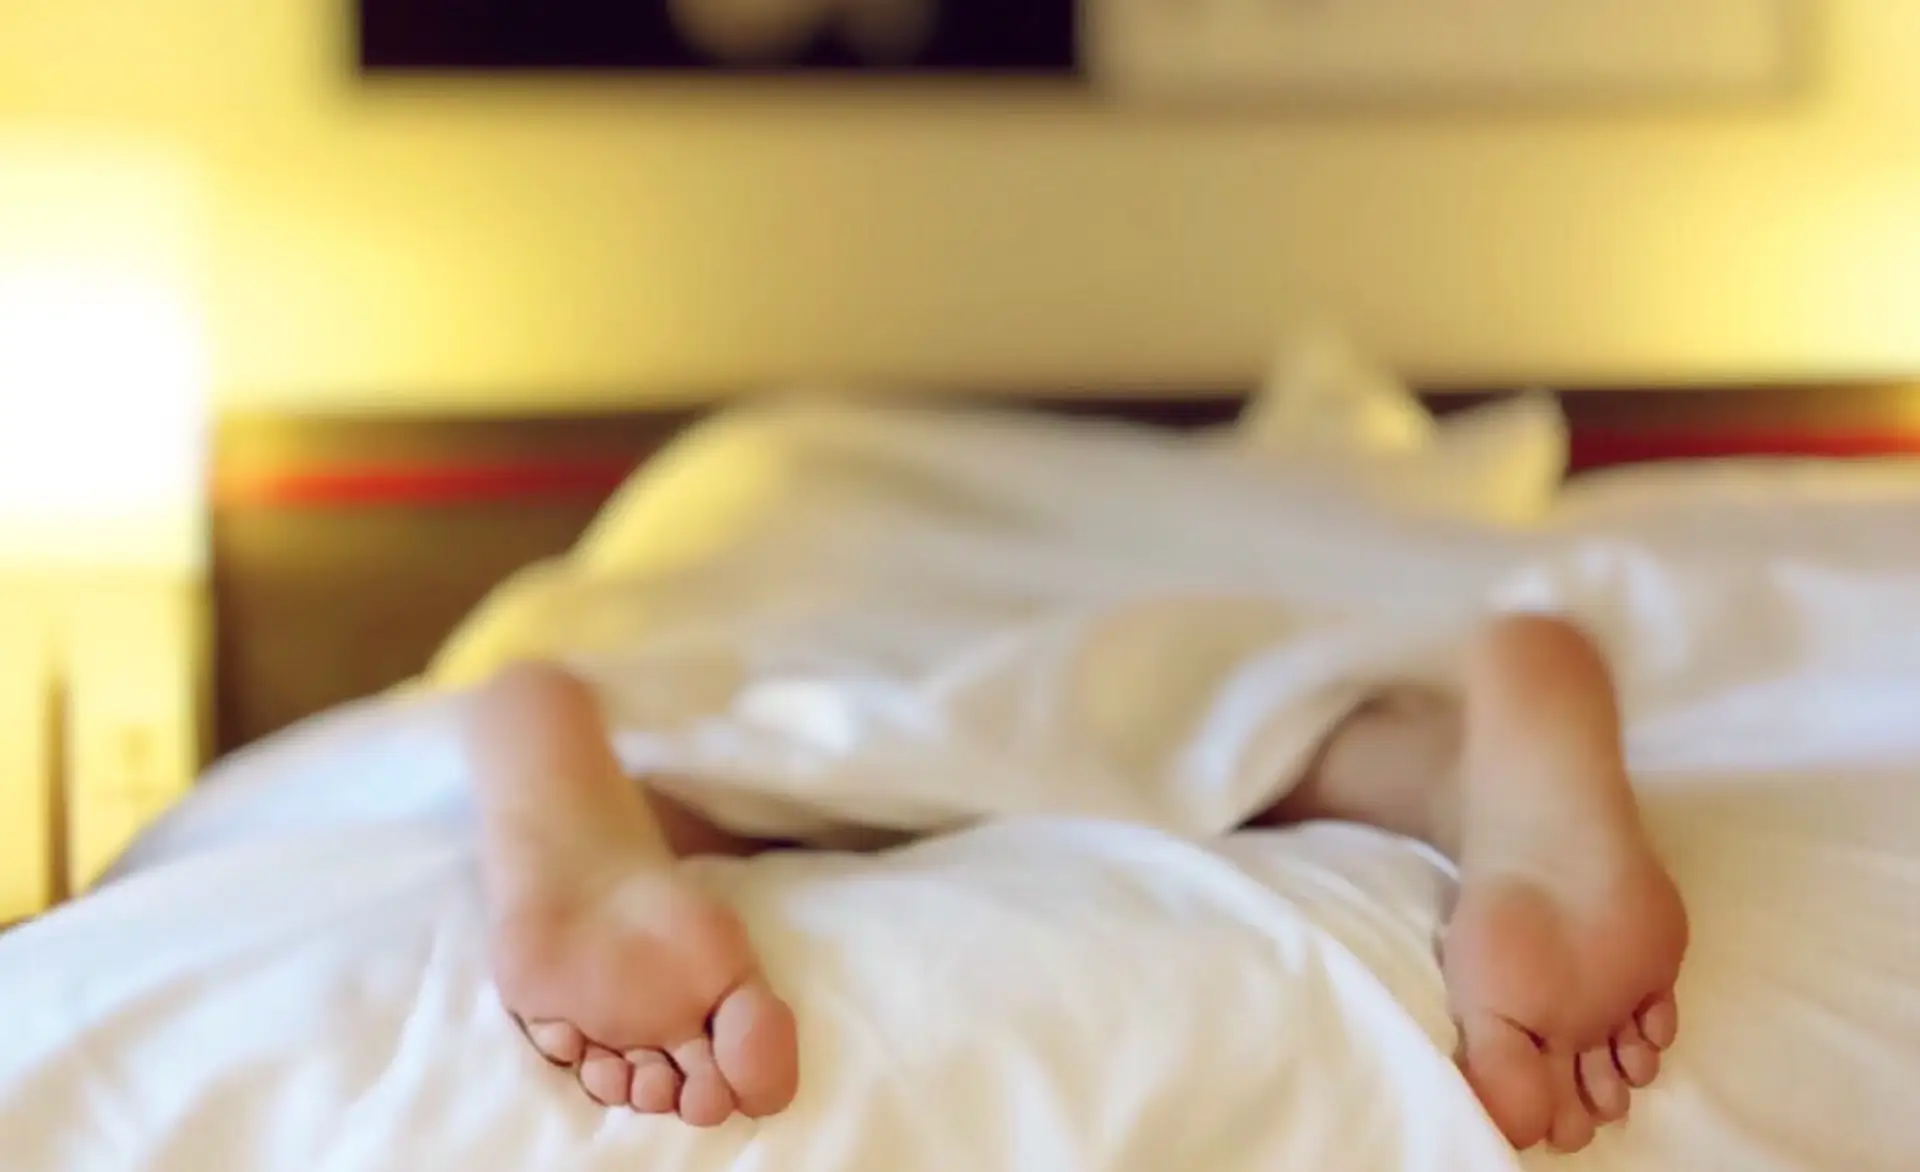 in image of someone in bed with their feet hanging out of the covers, showing a poor well-being in healthcare